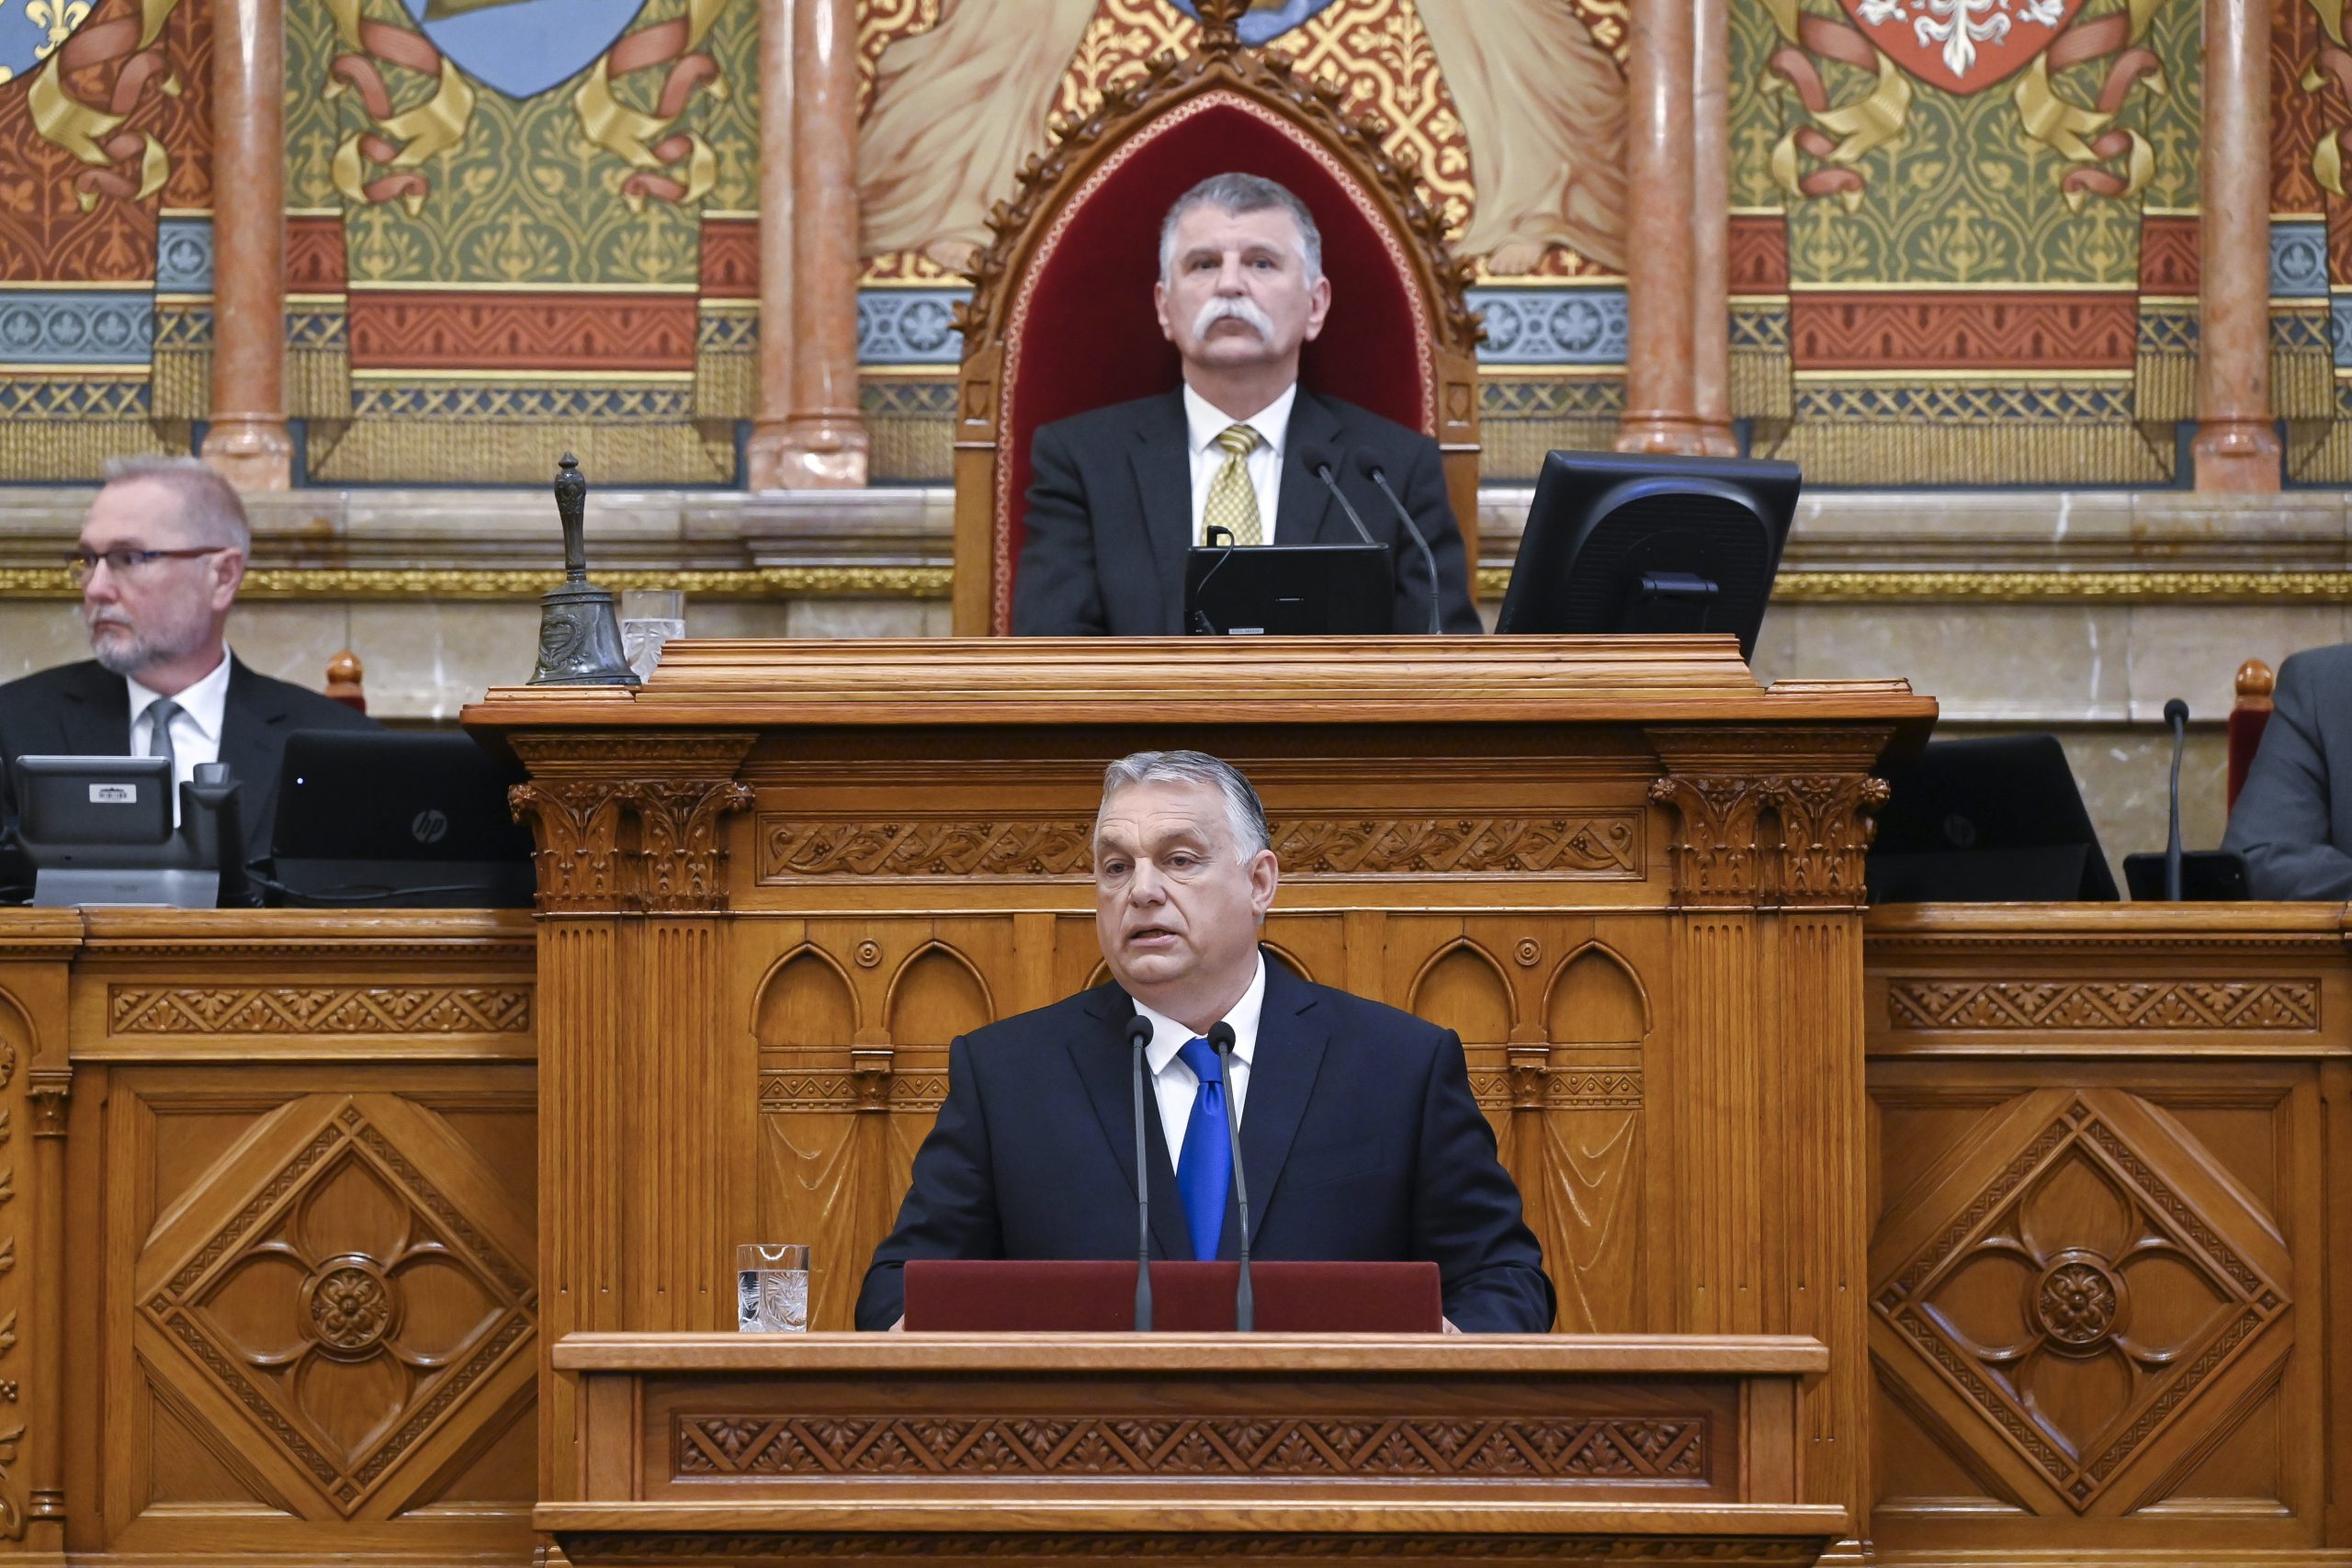 PM Orbán: Responsible, 'Feisty' Government Needed